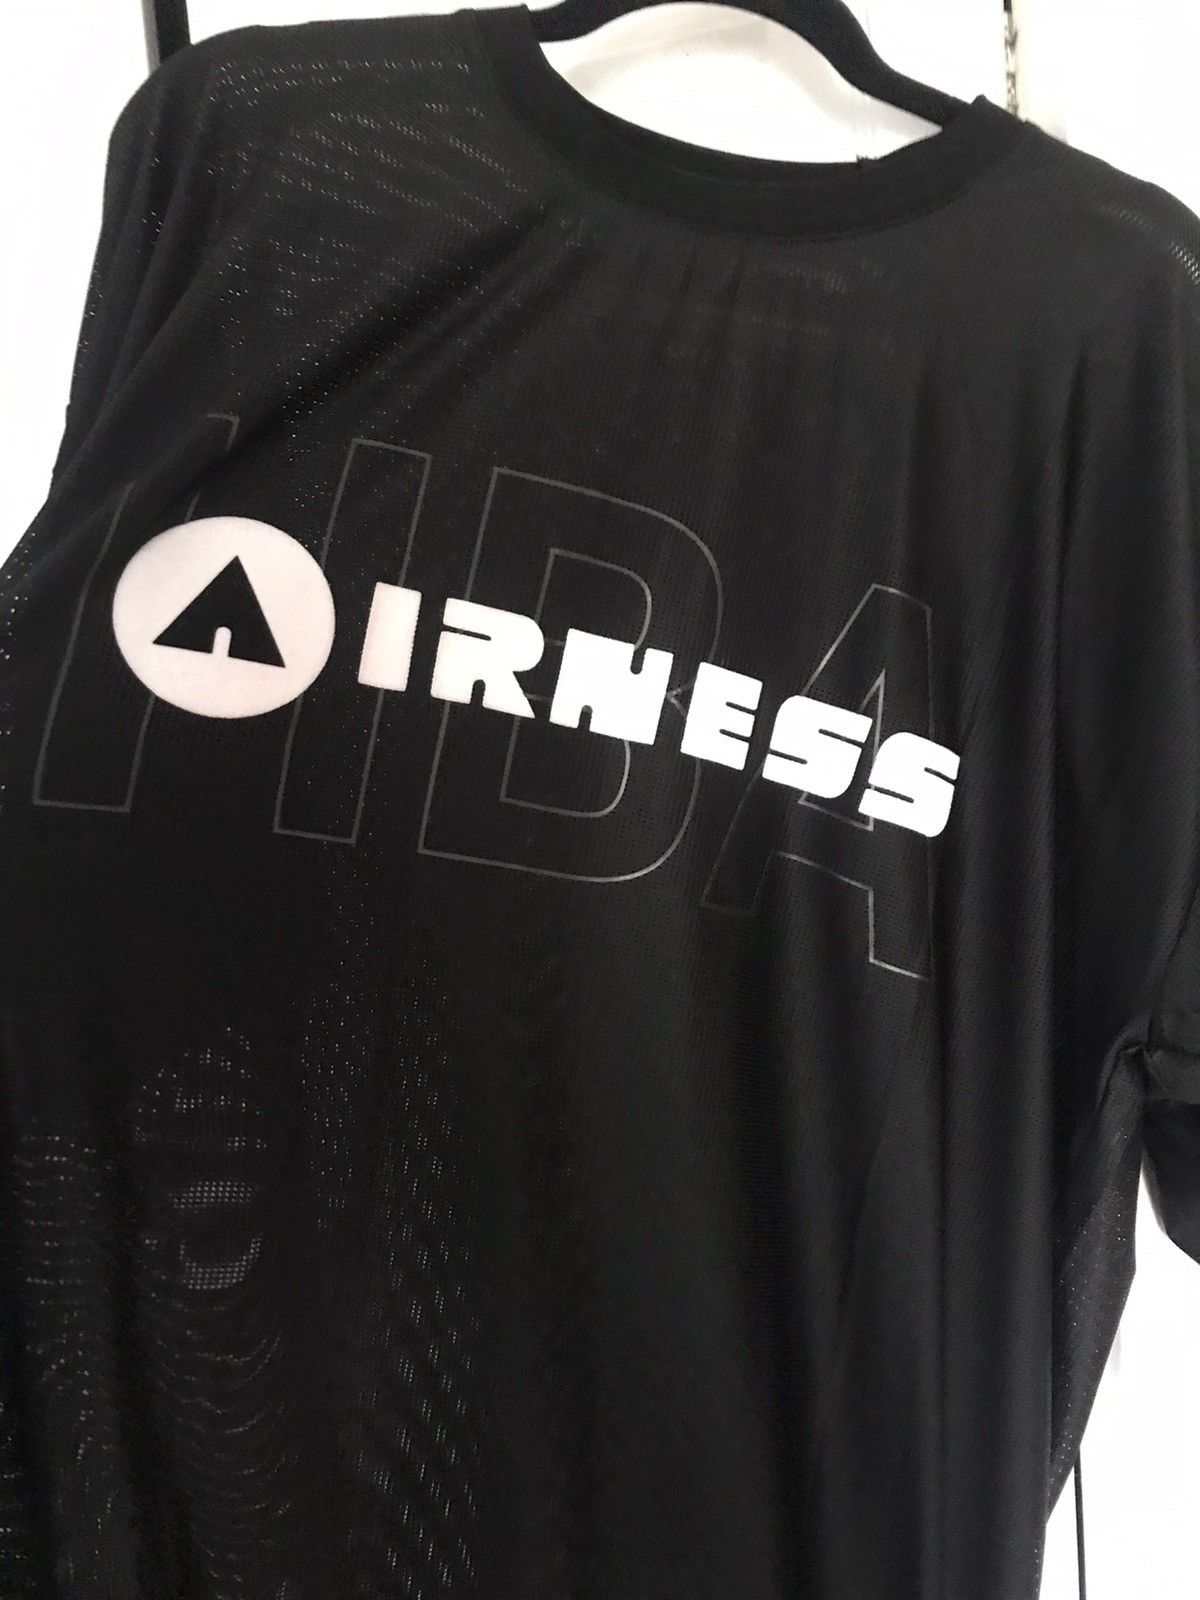 Hood By Air Hood By Air Airness Jersey Size US M / EU 48-50 / 2 - 2 Preview